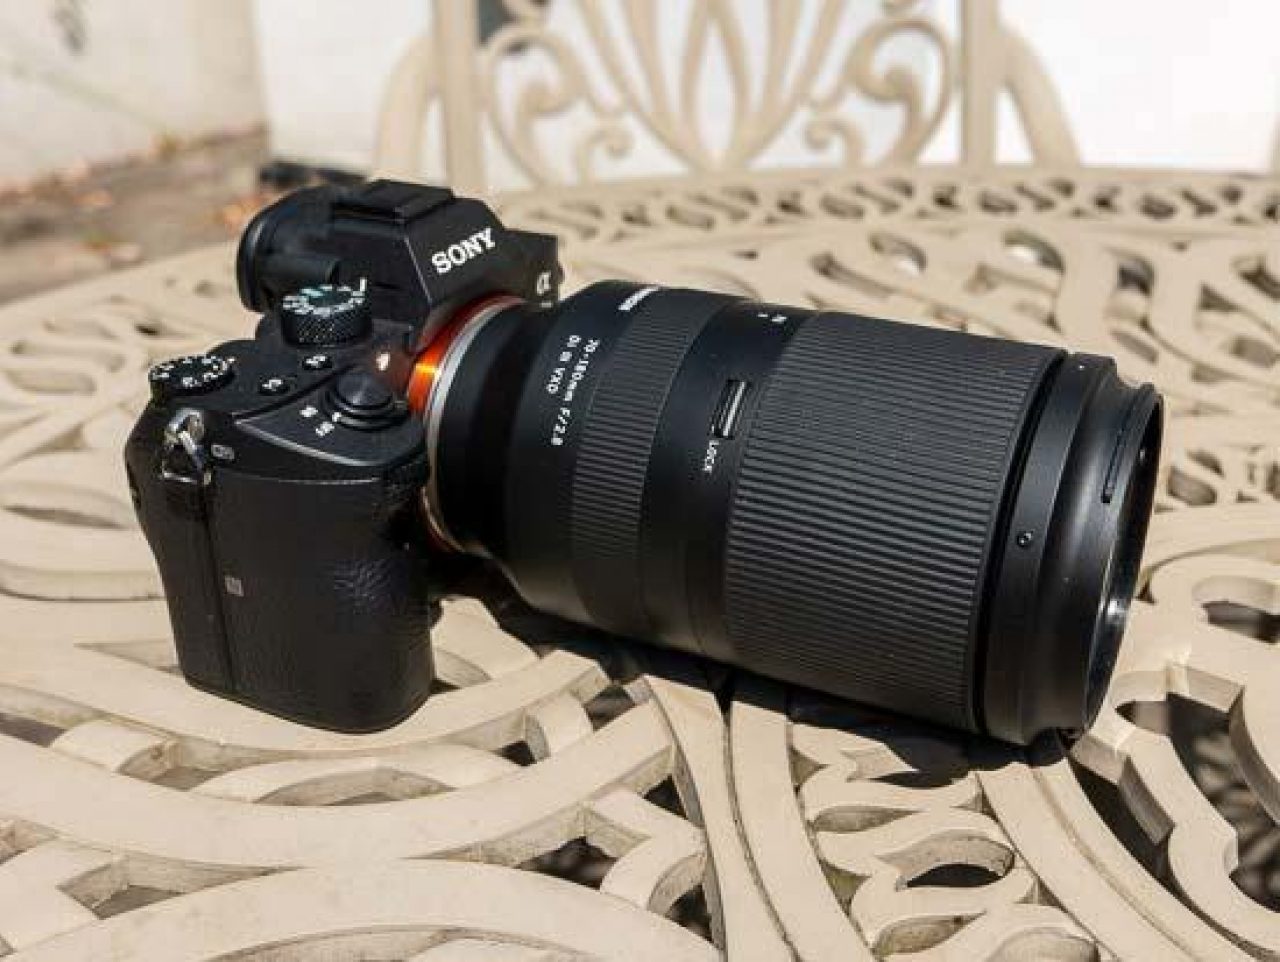 Tamron 70-180mm F/2.8 Di III VXD Review | Photography Blog